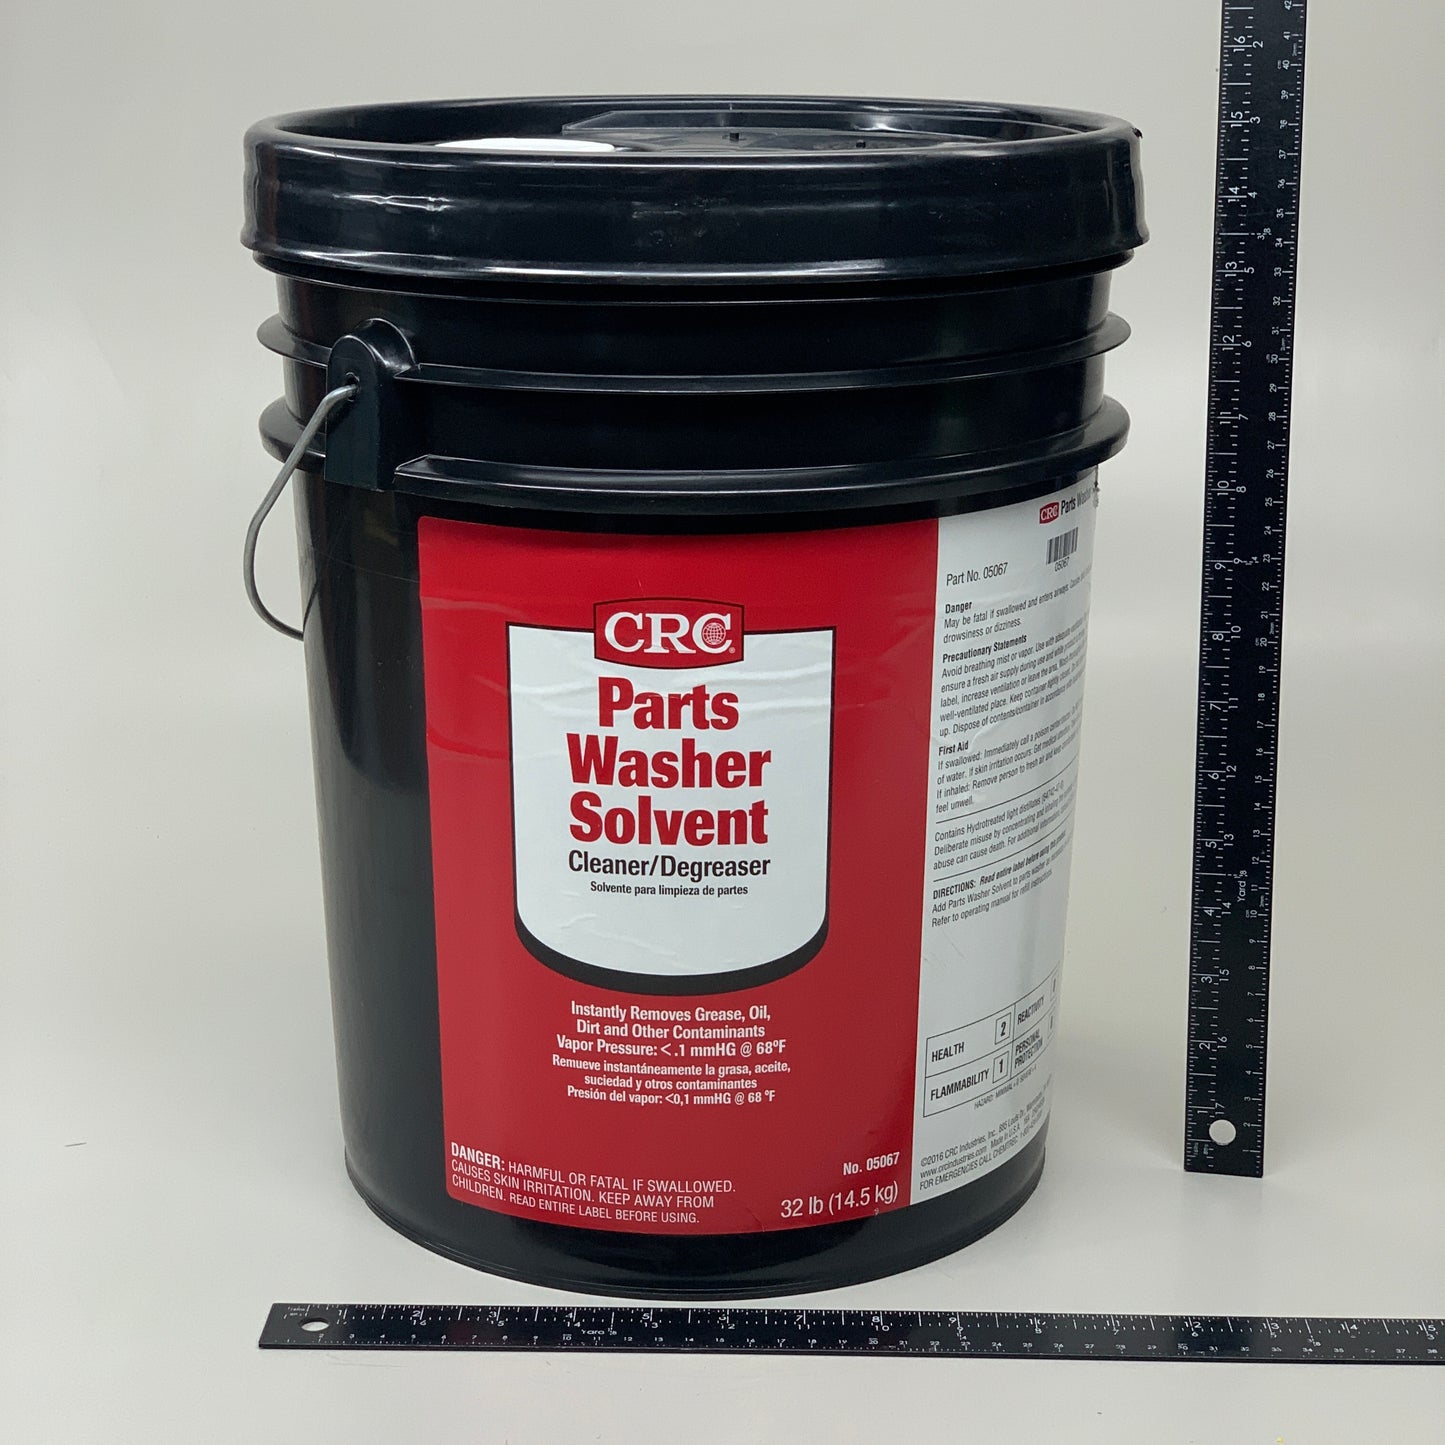 CRC Parts Washer Solvent Cleaner/Degreaser 5 Gal 05067